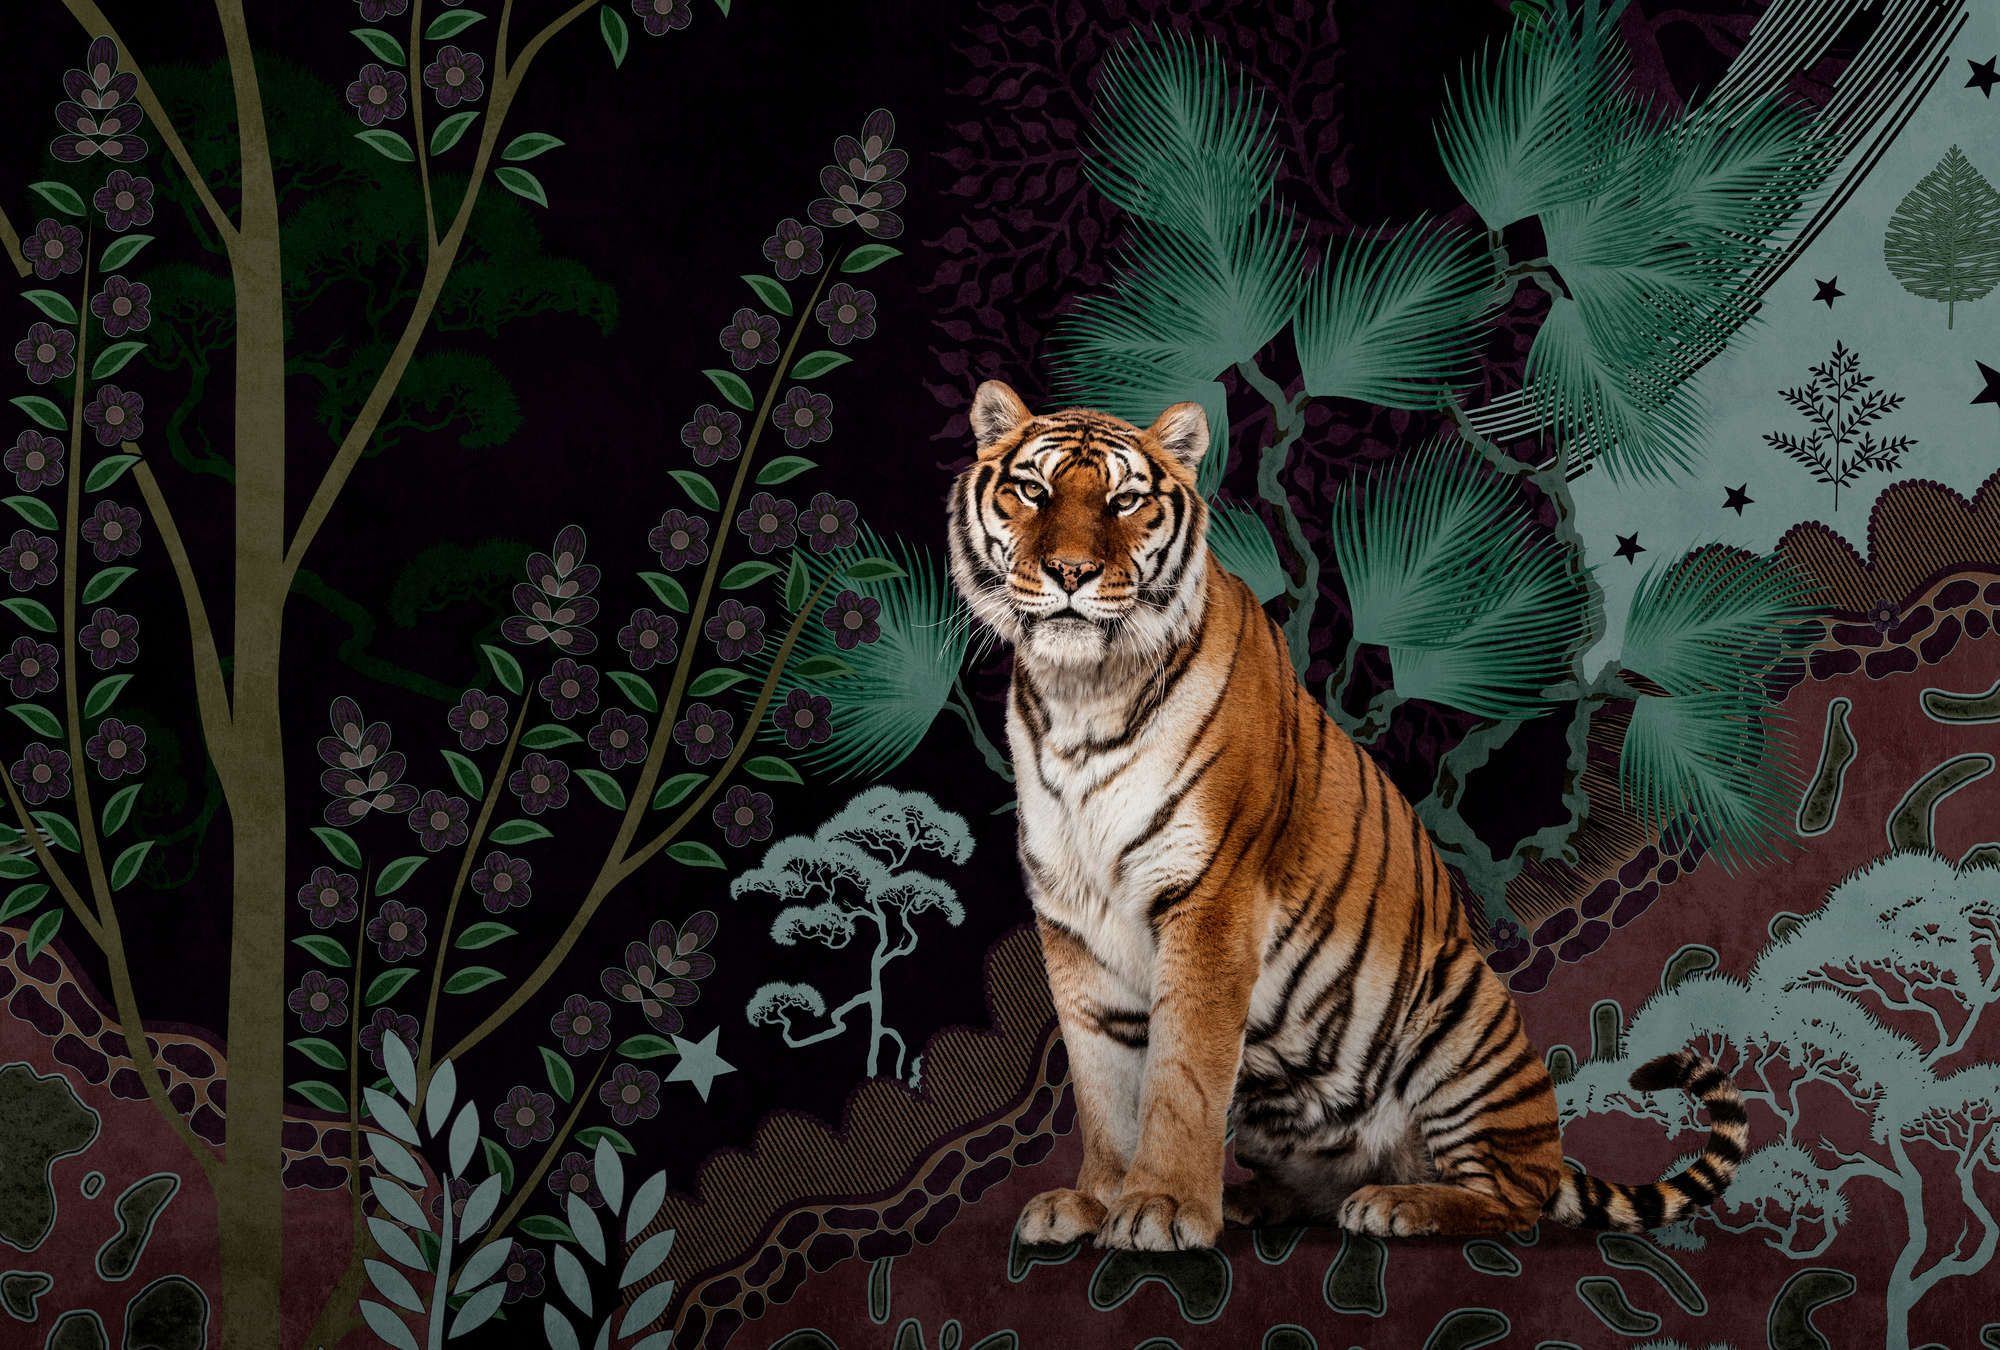             Photo wallpaper »khan« - Abstract jungle motif with tiger - Lightly textured non-woven fabric
        